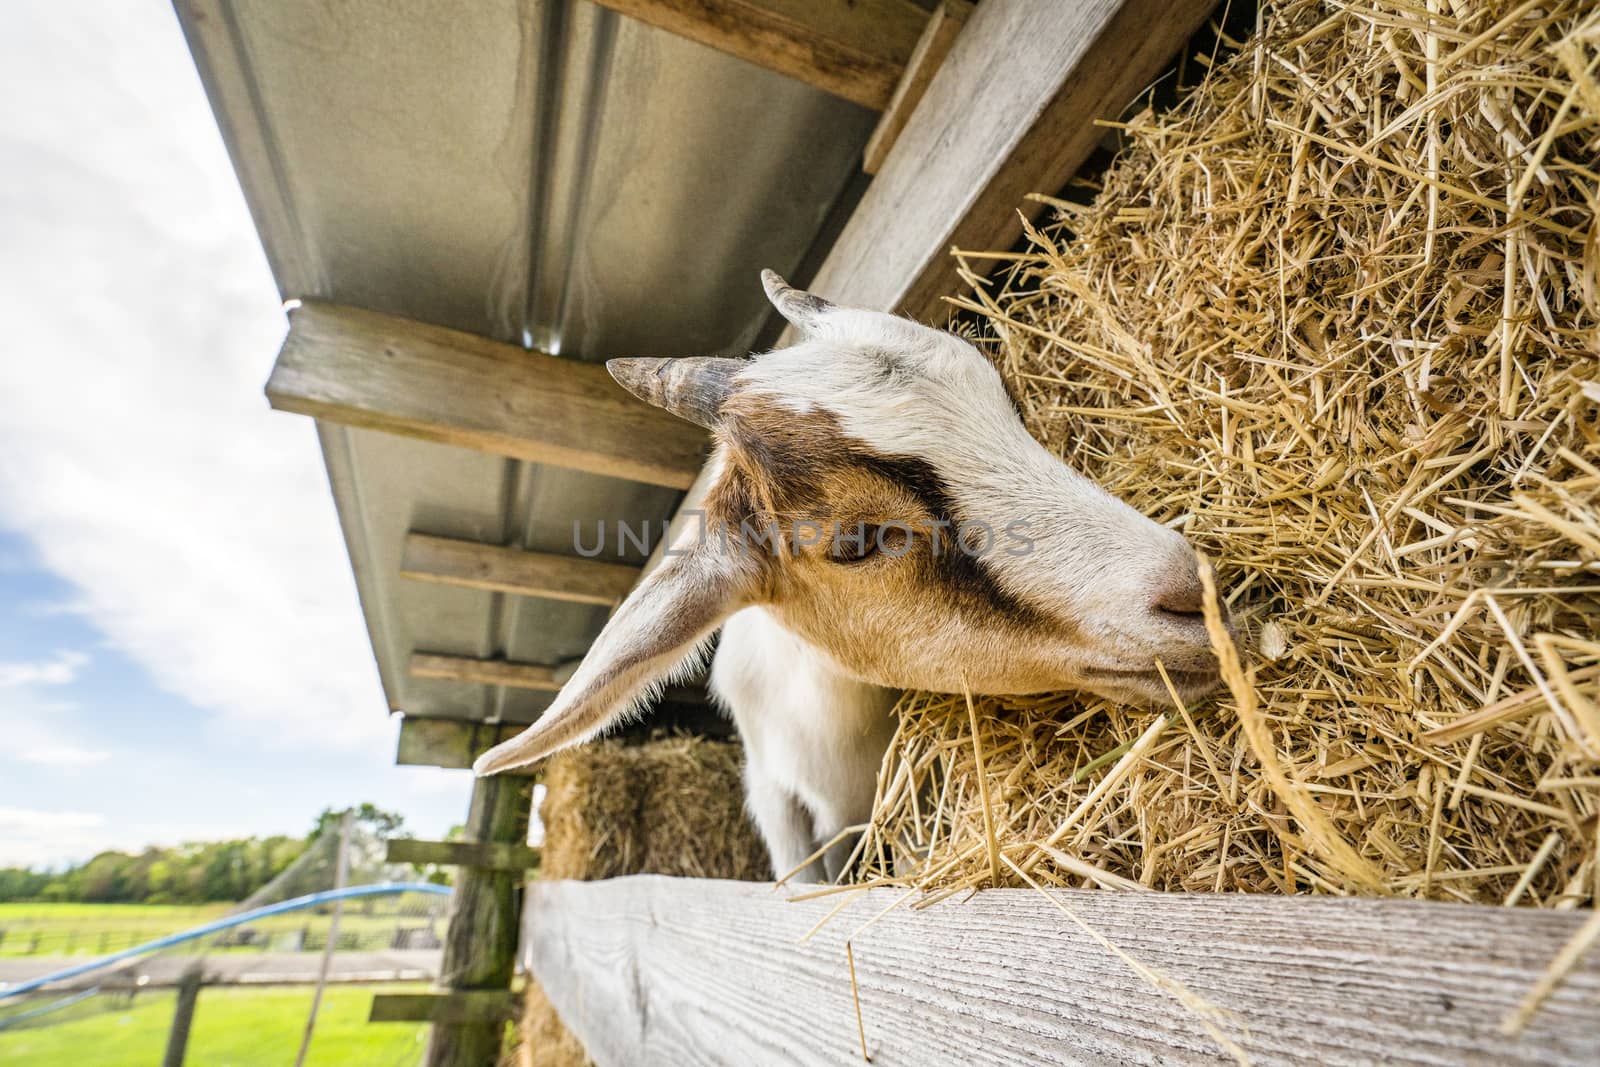 Goat eating hay on a rural farm in the summer